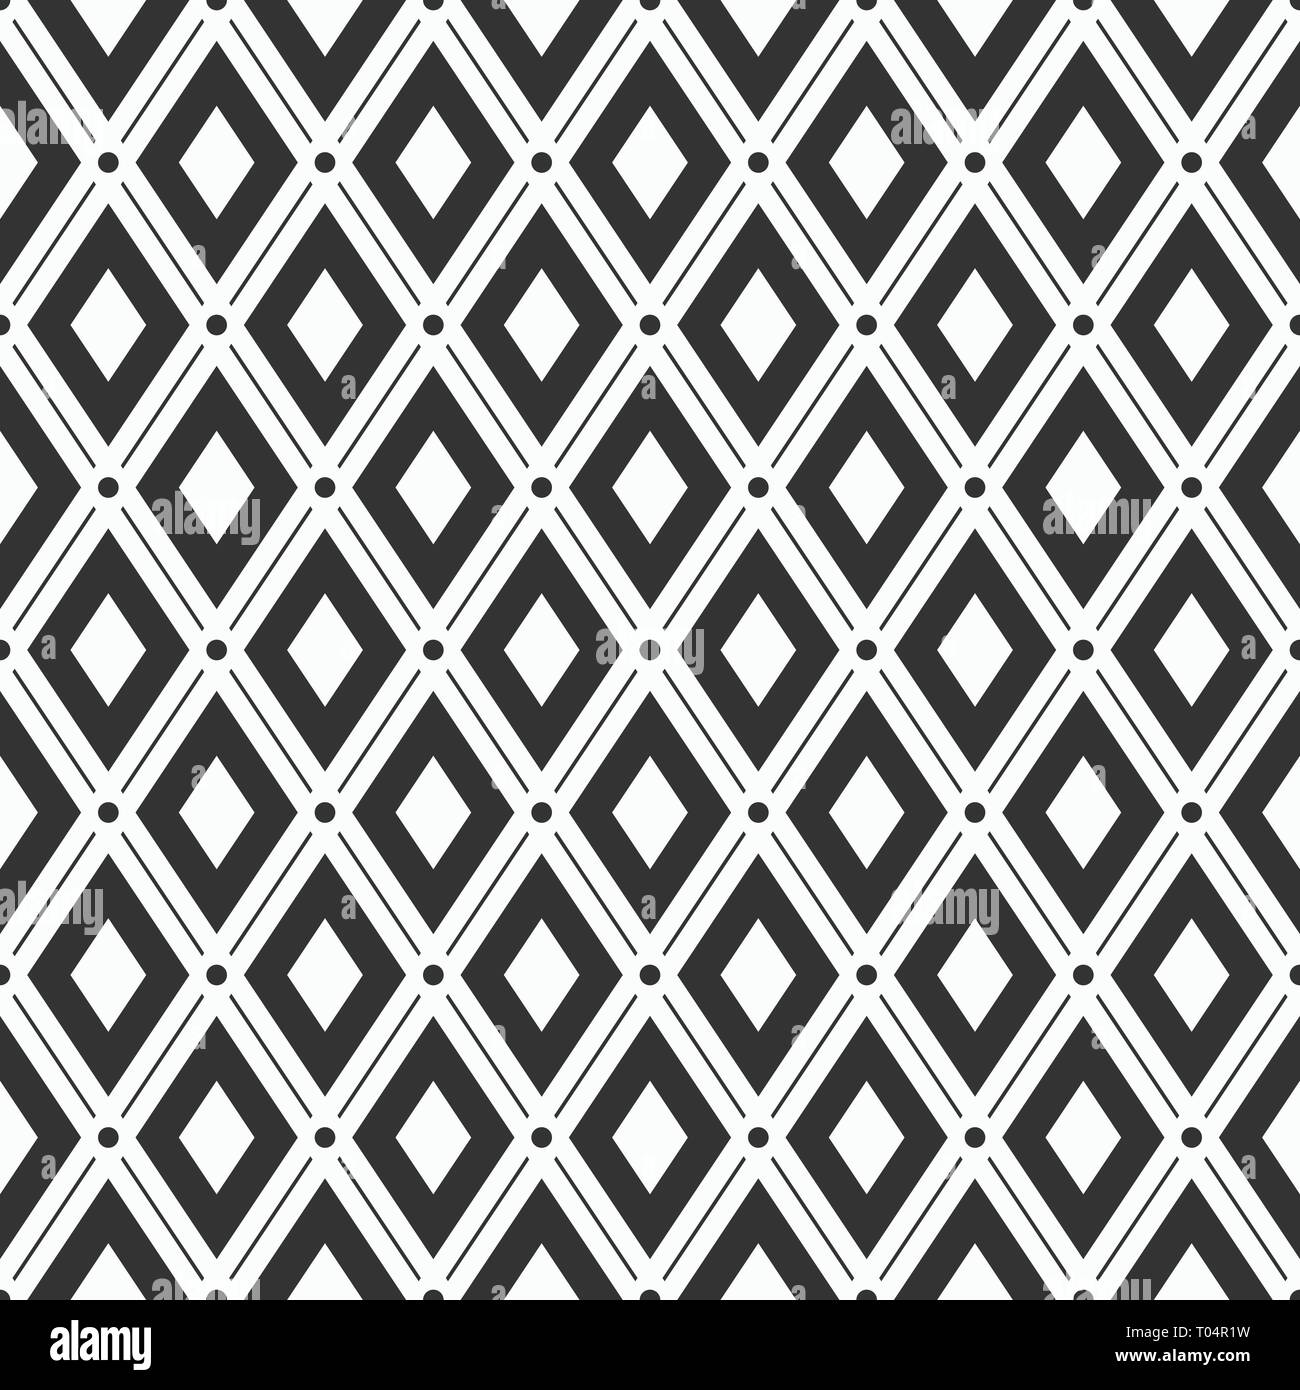 Abstract geometric seamless pattern. Regularly repeated rhombuses